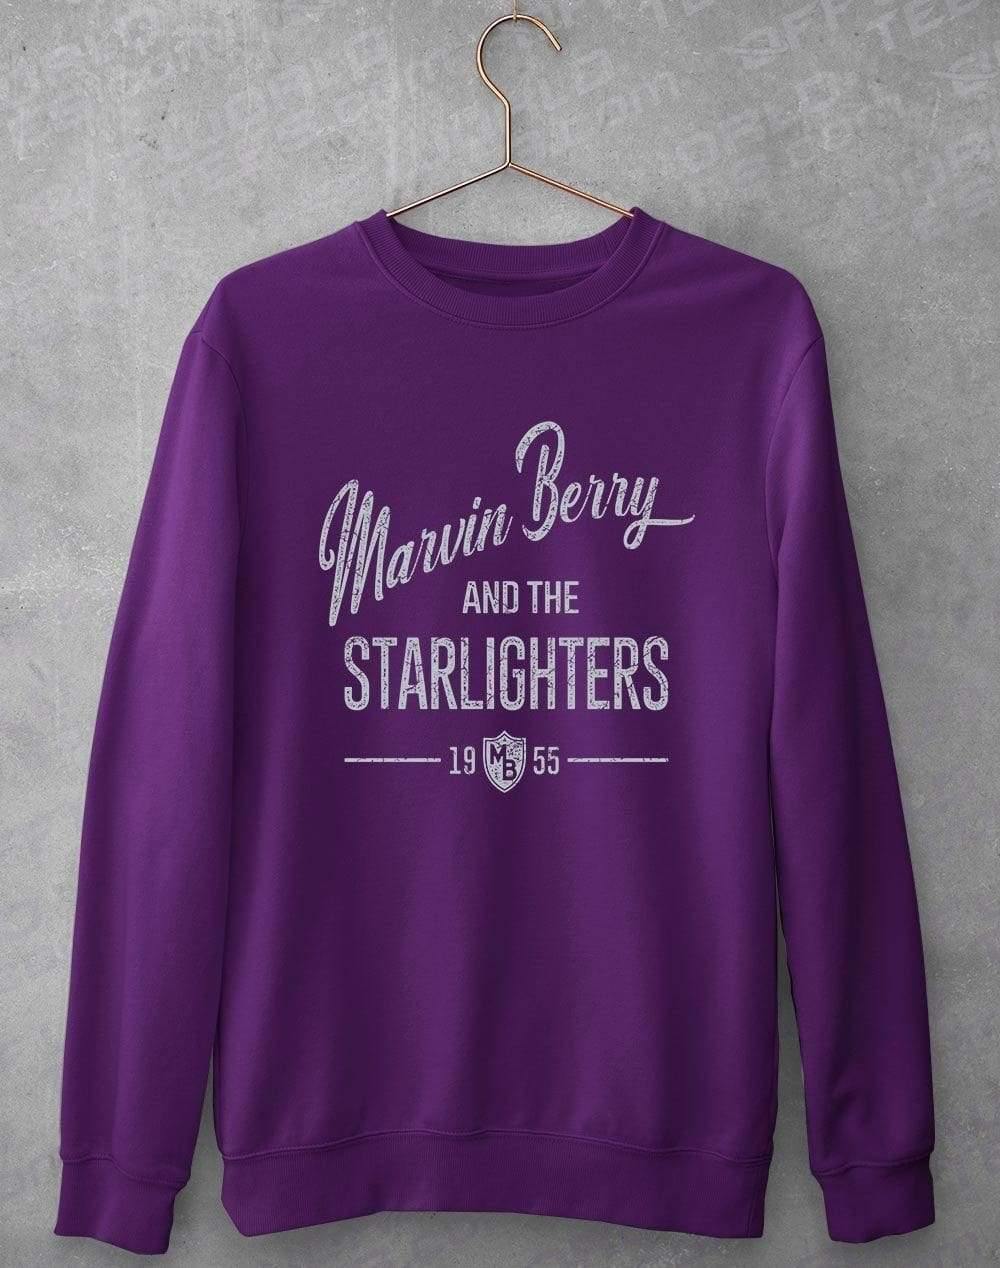 Marvin Berry and the Starlighters Sweatshirt S / Purple  - Off World Tees